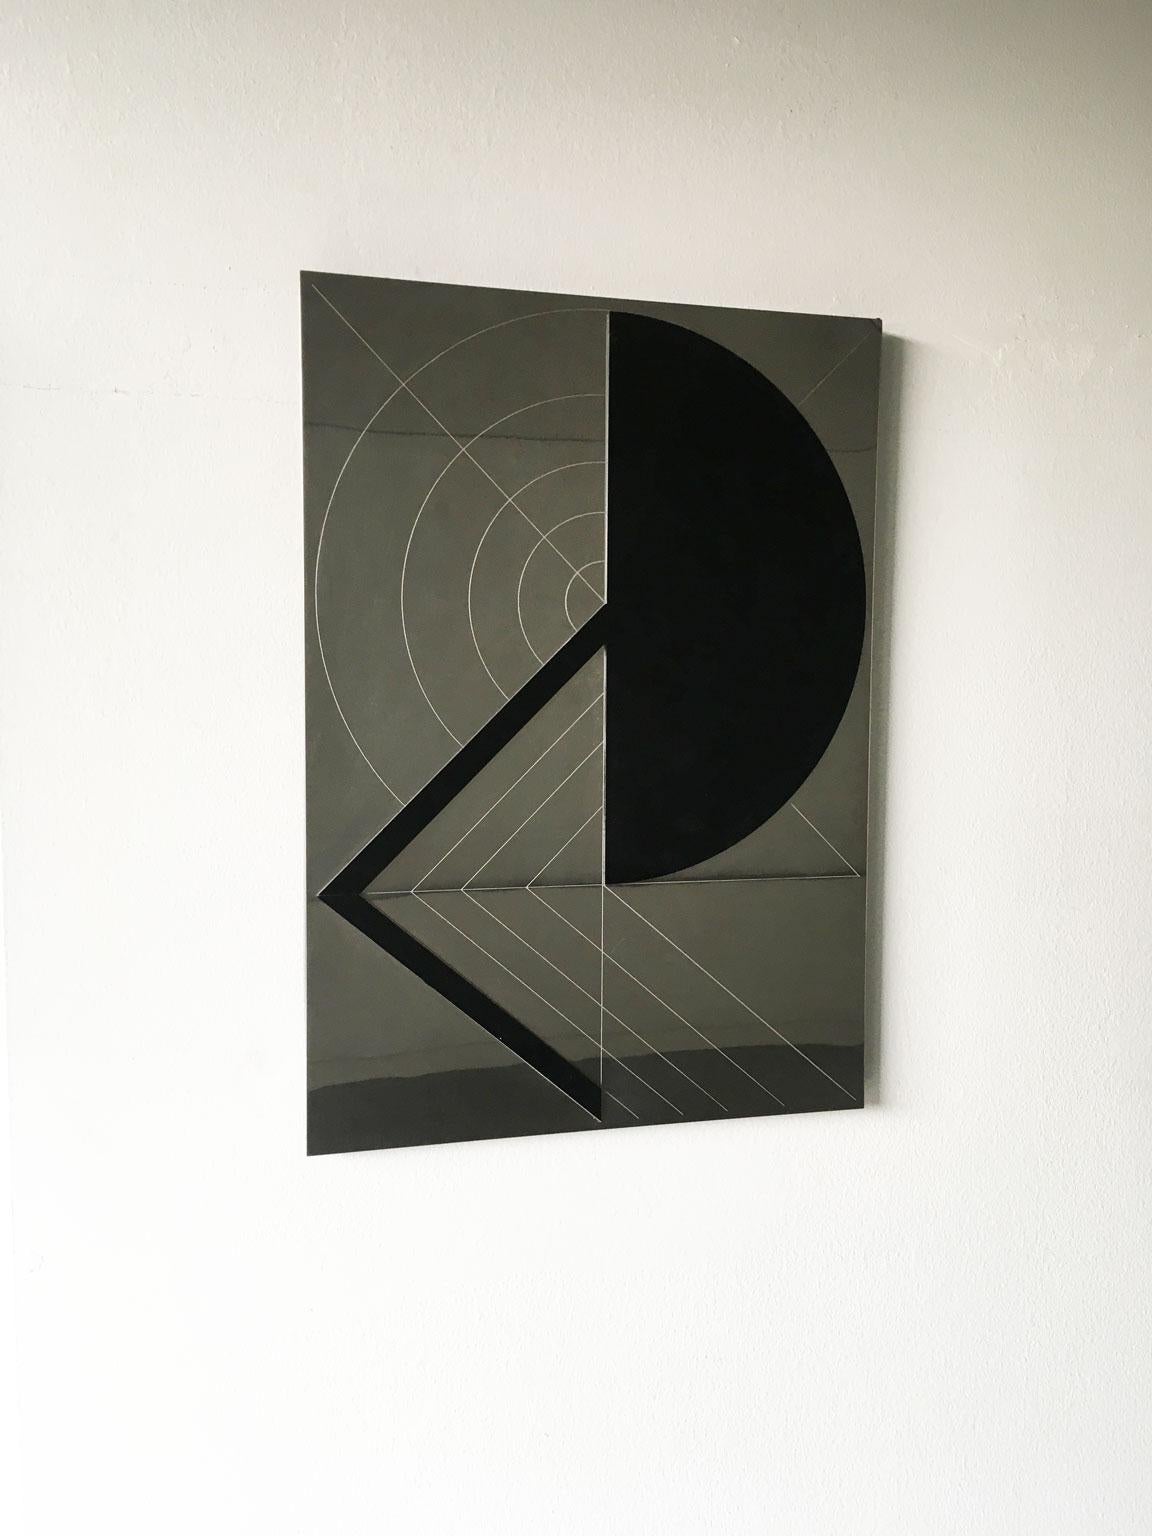 The project of this engaging artwork was made in 1974 by the Brasilian artist Edival ramosa, during his stay in Italy, from 1964 to 1974.
In this engraved steel artwork we can find elements in black plexiglass: the artist spends a lot of his time